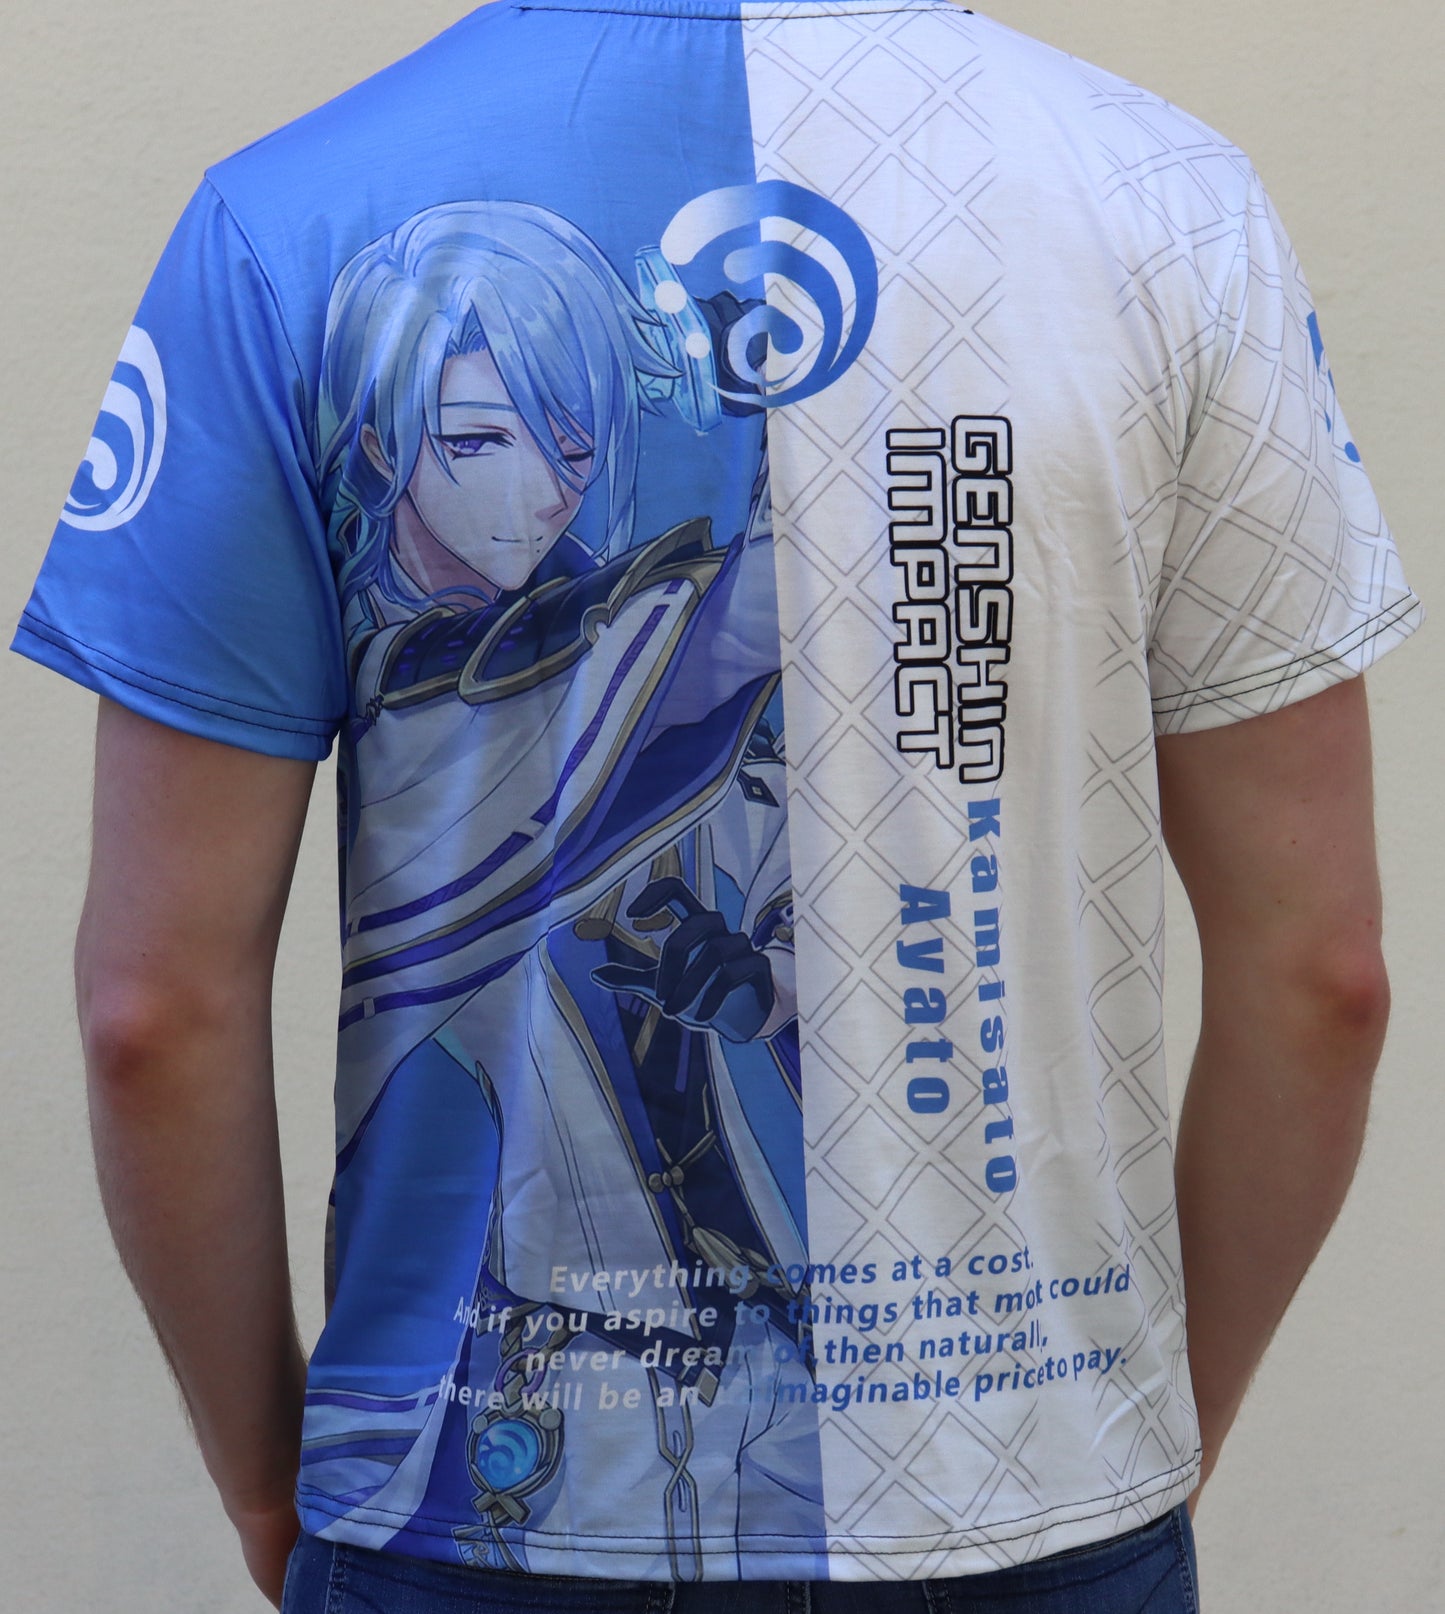 Ayato T-Shirt(Price Does Not Include Shipping)